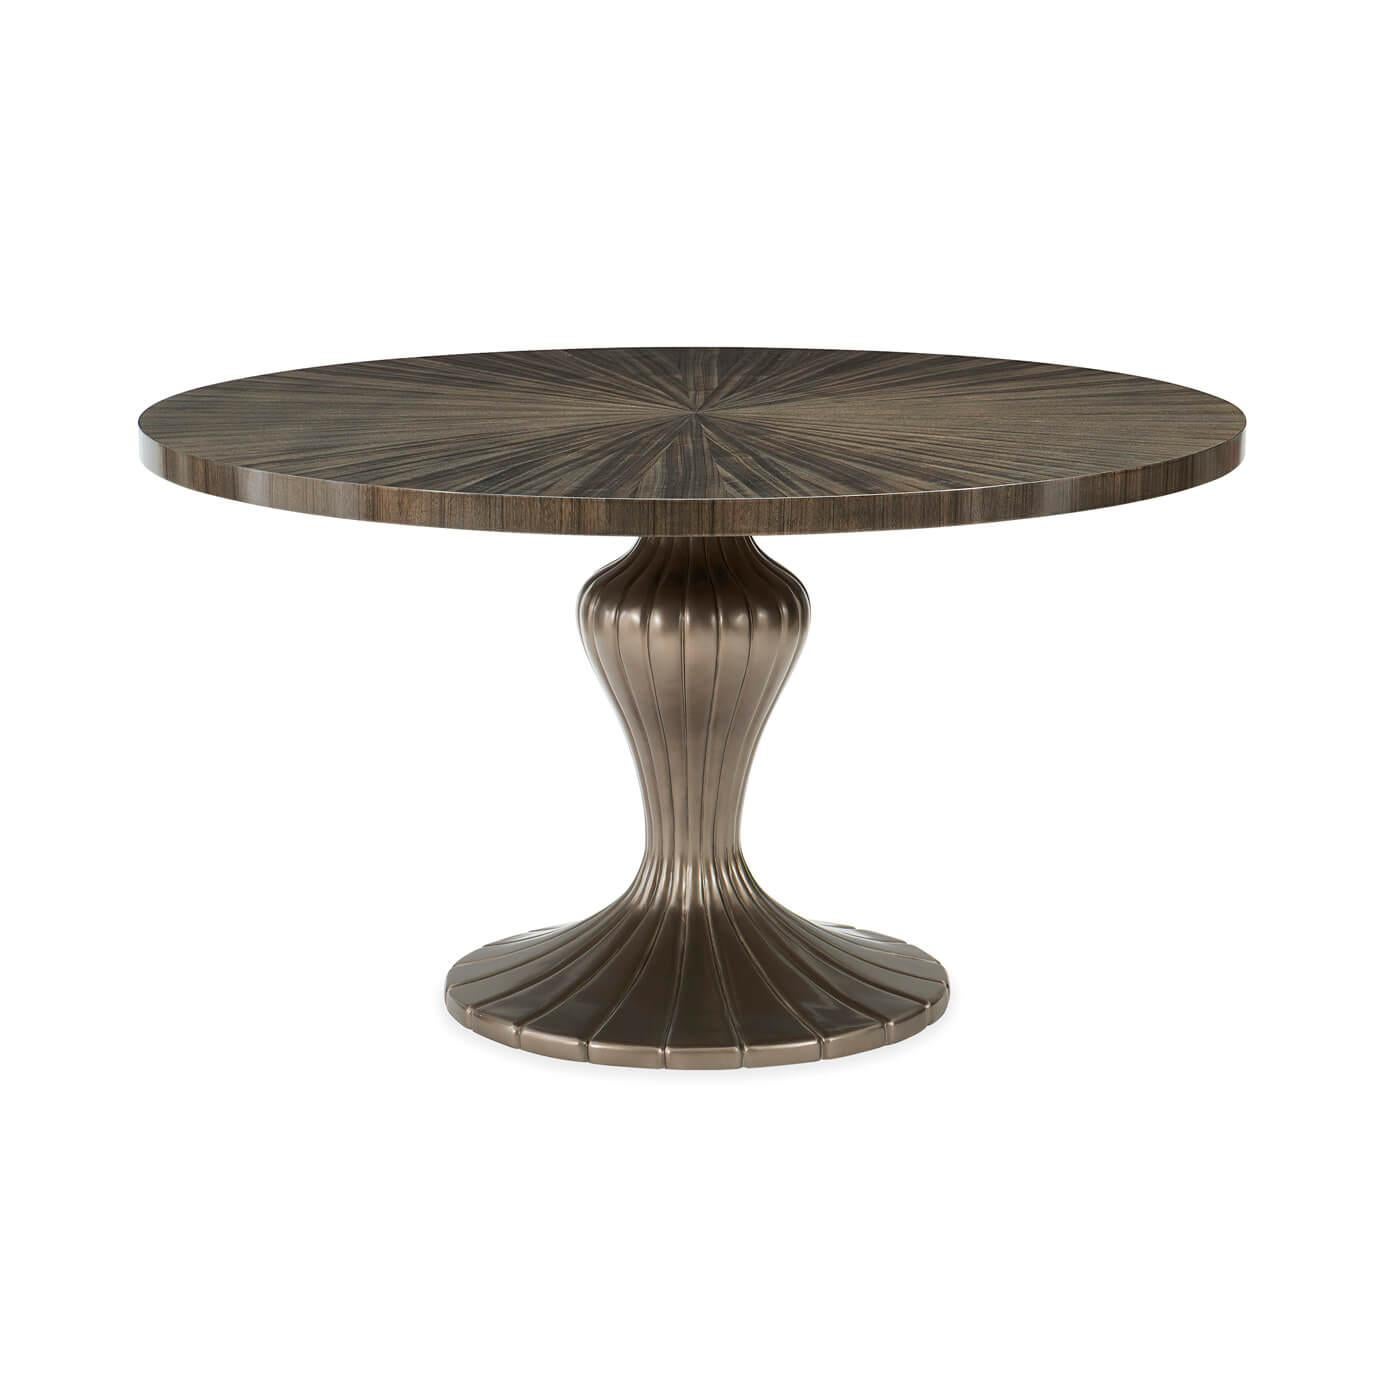 Asian Art Deco Inspired Style Round Dining Table For Sale